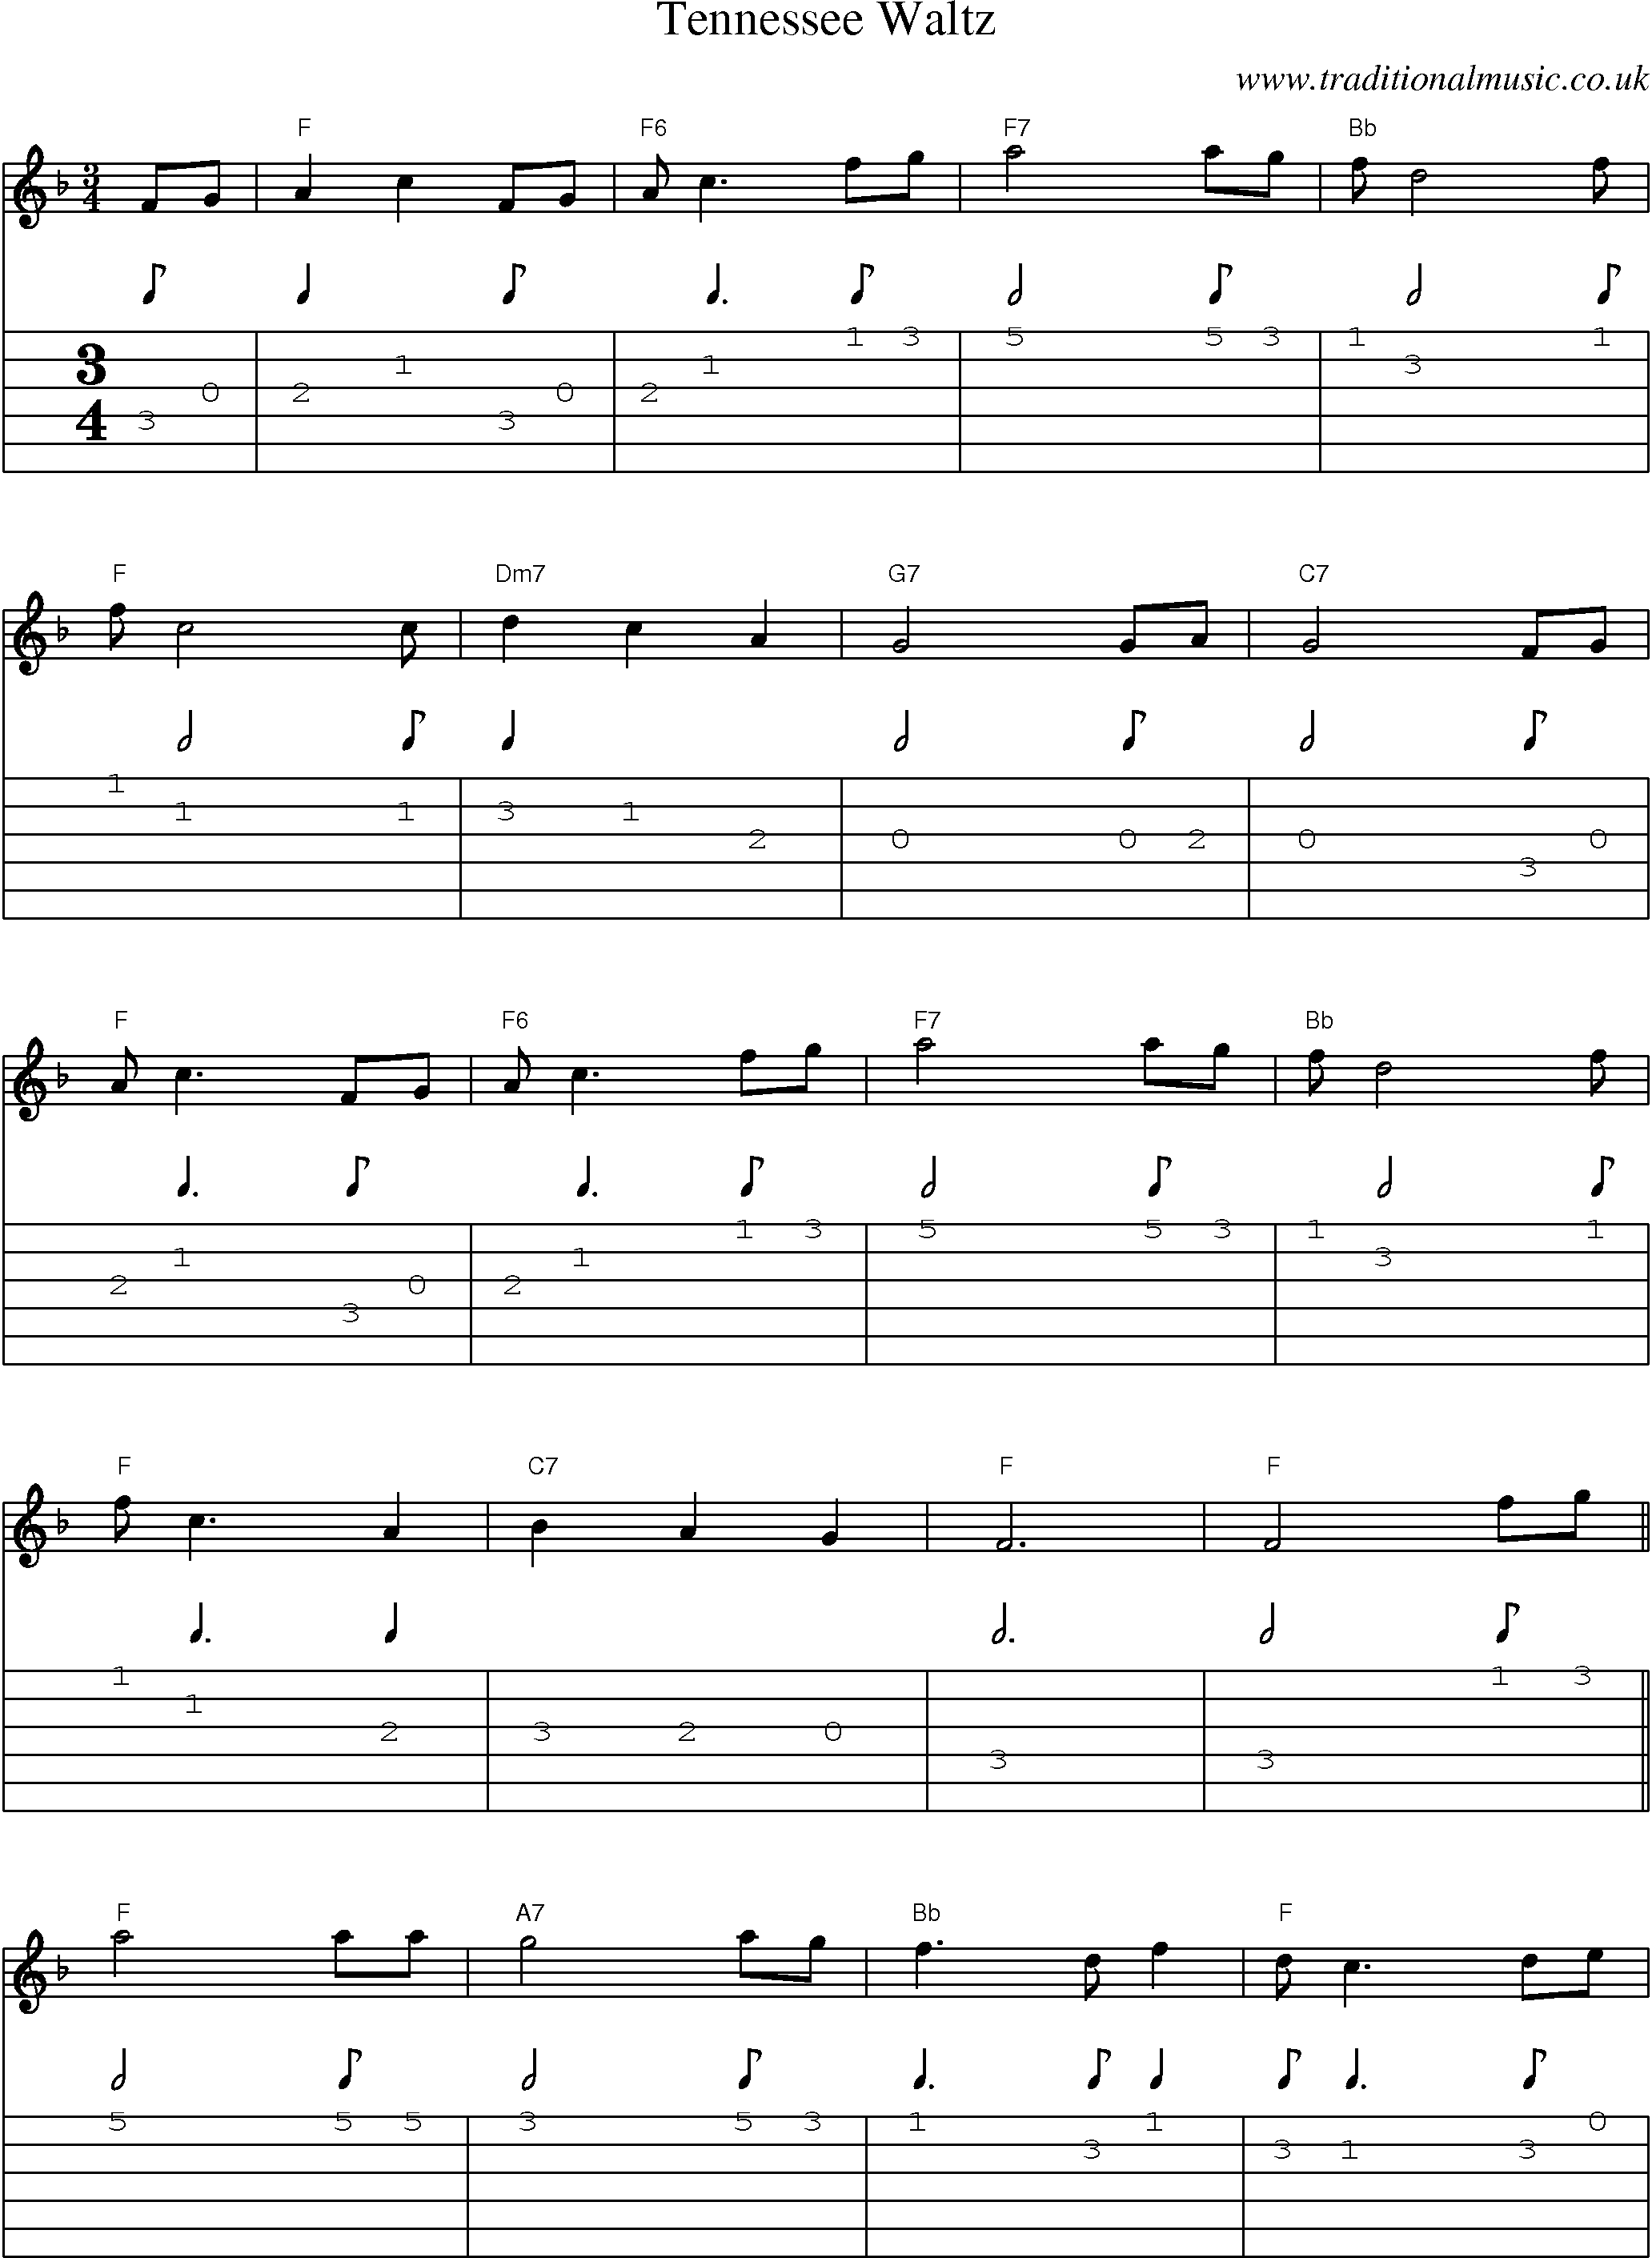 Music Score and Guitar Tabs for Tennessee Waltz